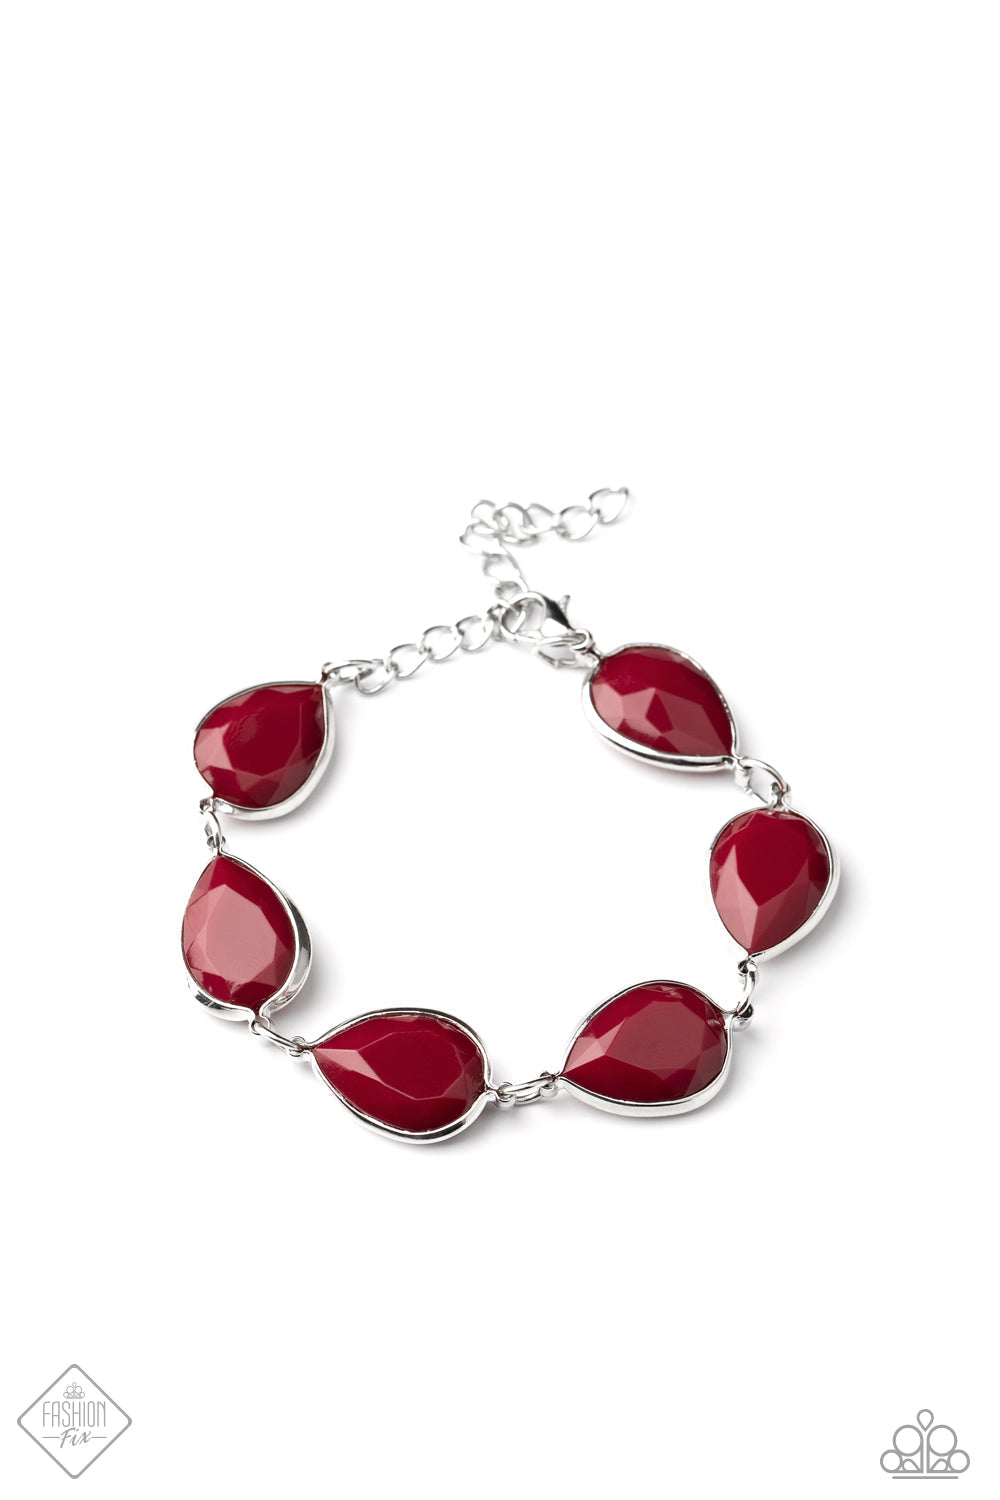 REIGNy Days - Red and Silver Bracelet - Paparazzi Accessories -  Encased in sleek silver frames, faceted Wine acrylic teardrops delicately link around the wrist for an elegant pop of color. Features an adjustable clasp closure.